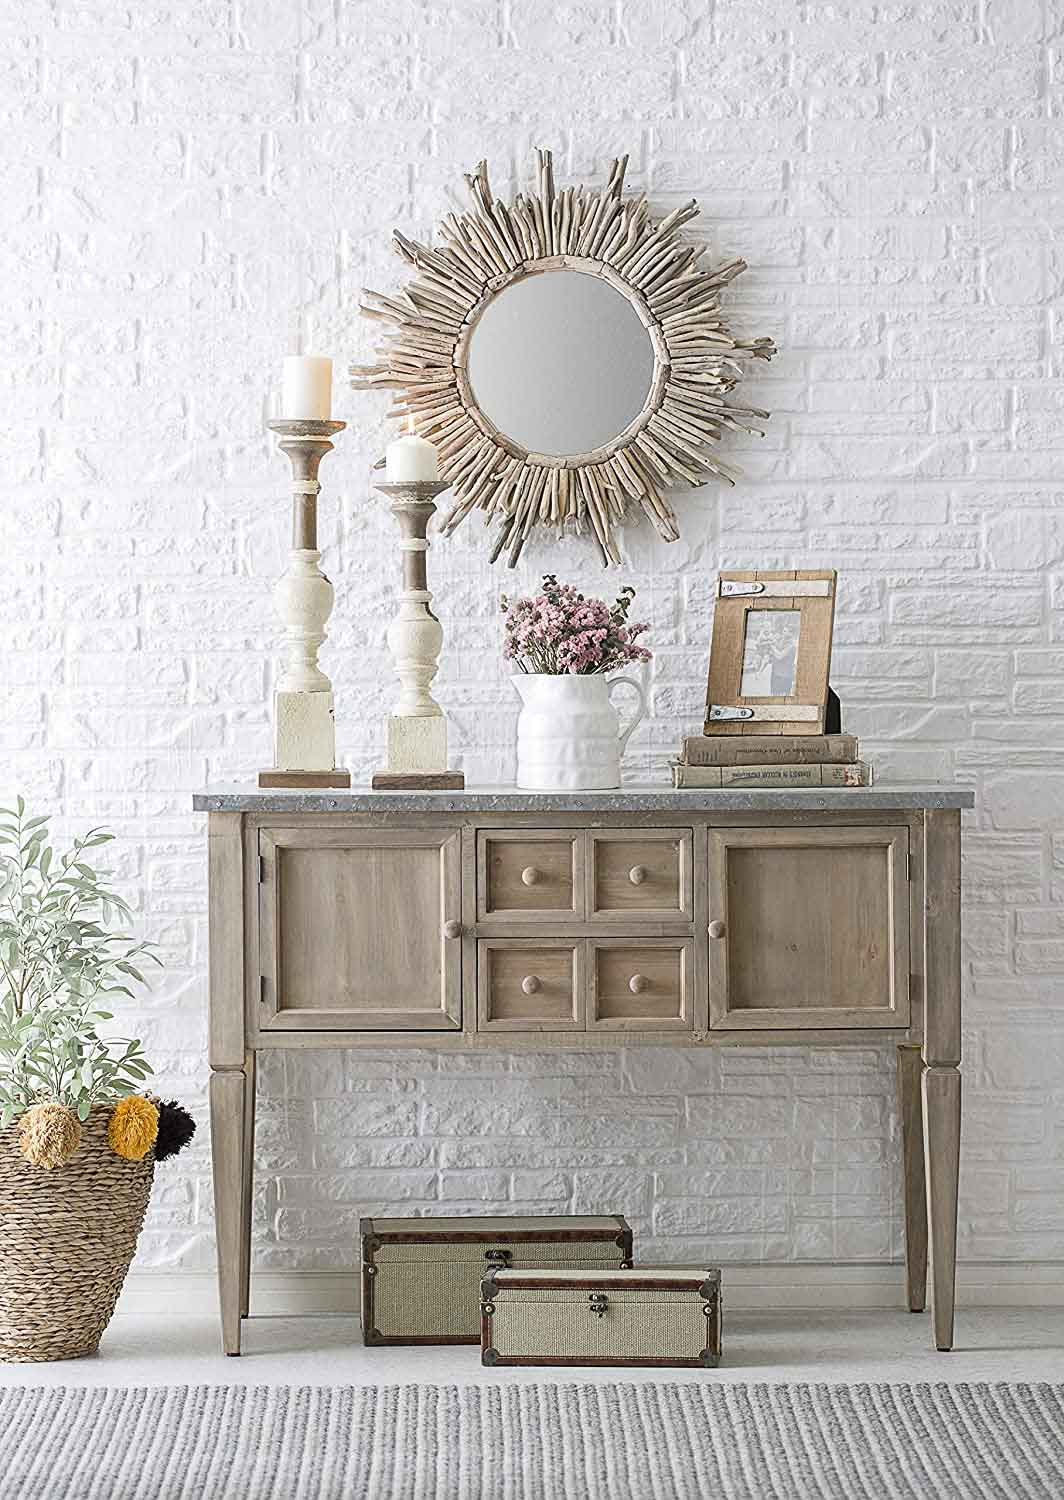 Round driftwood mirror above console